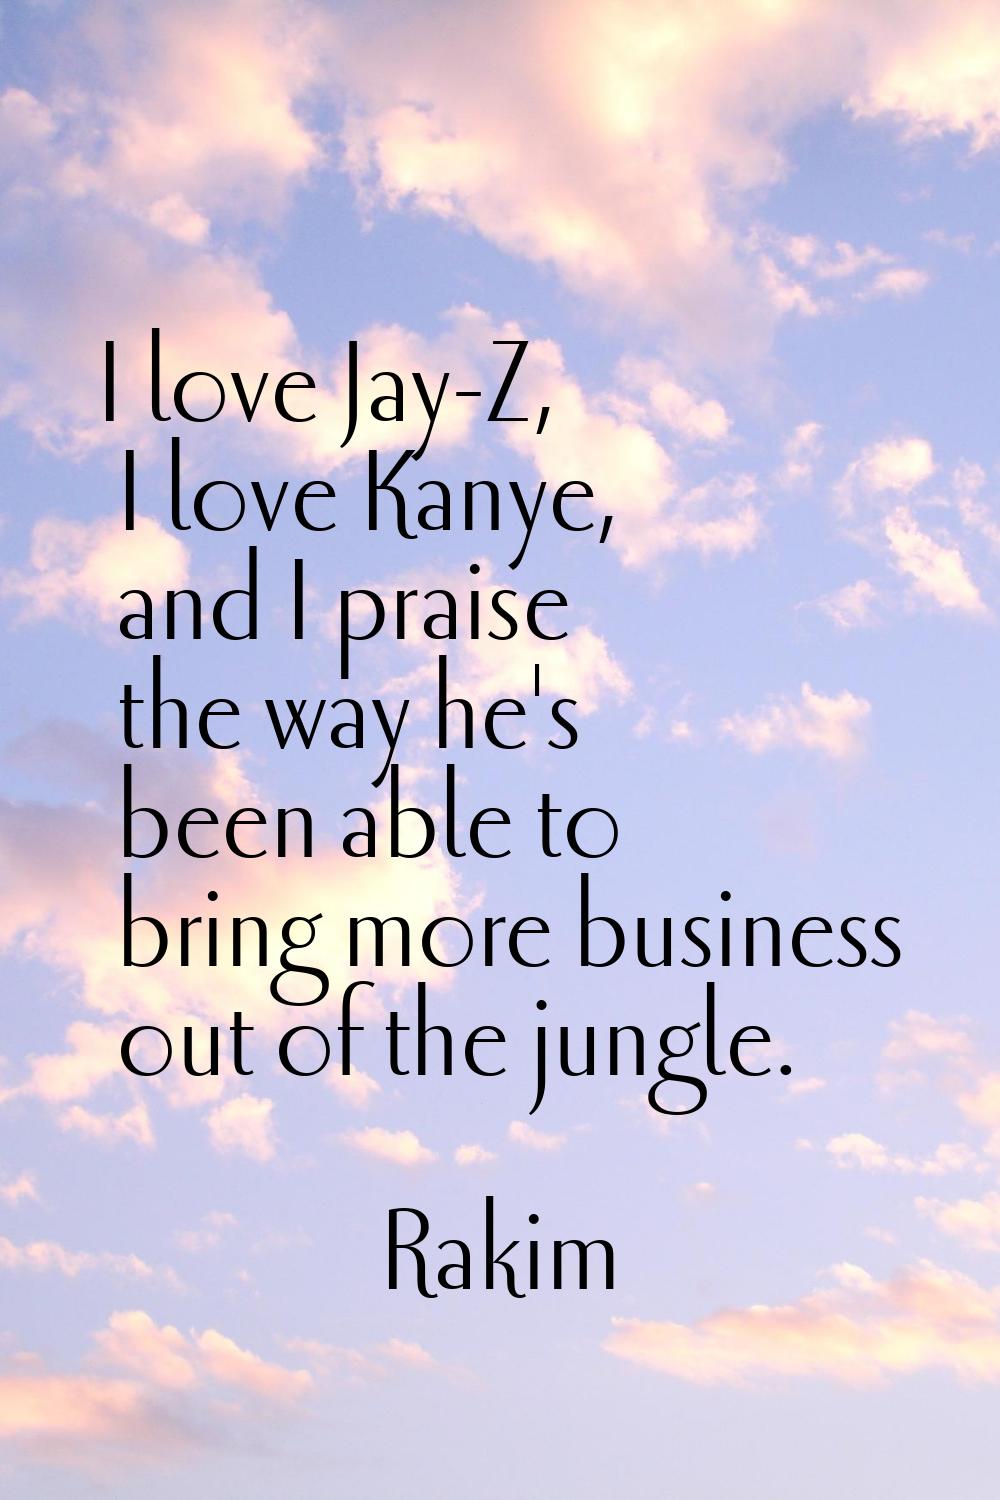 I love Jay-Z, I love Kanye, and I praise the way he's been able to bring more business out of the j